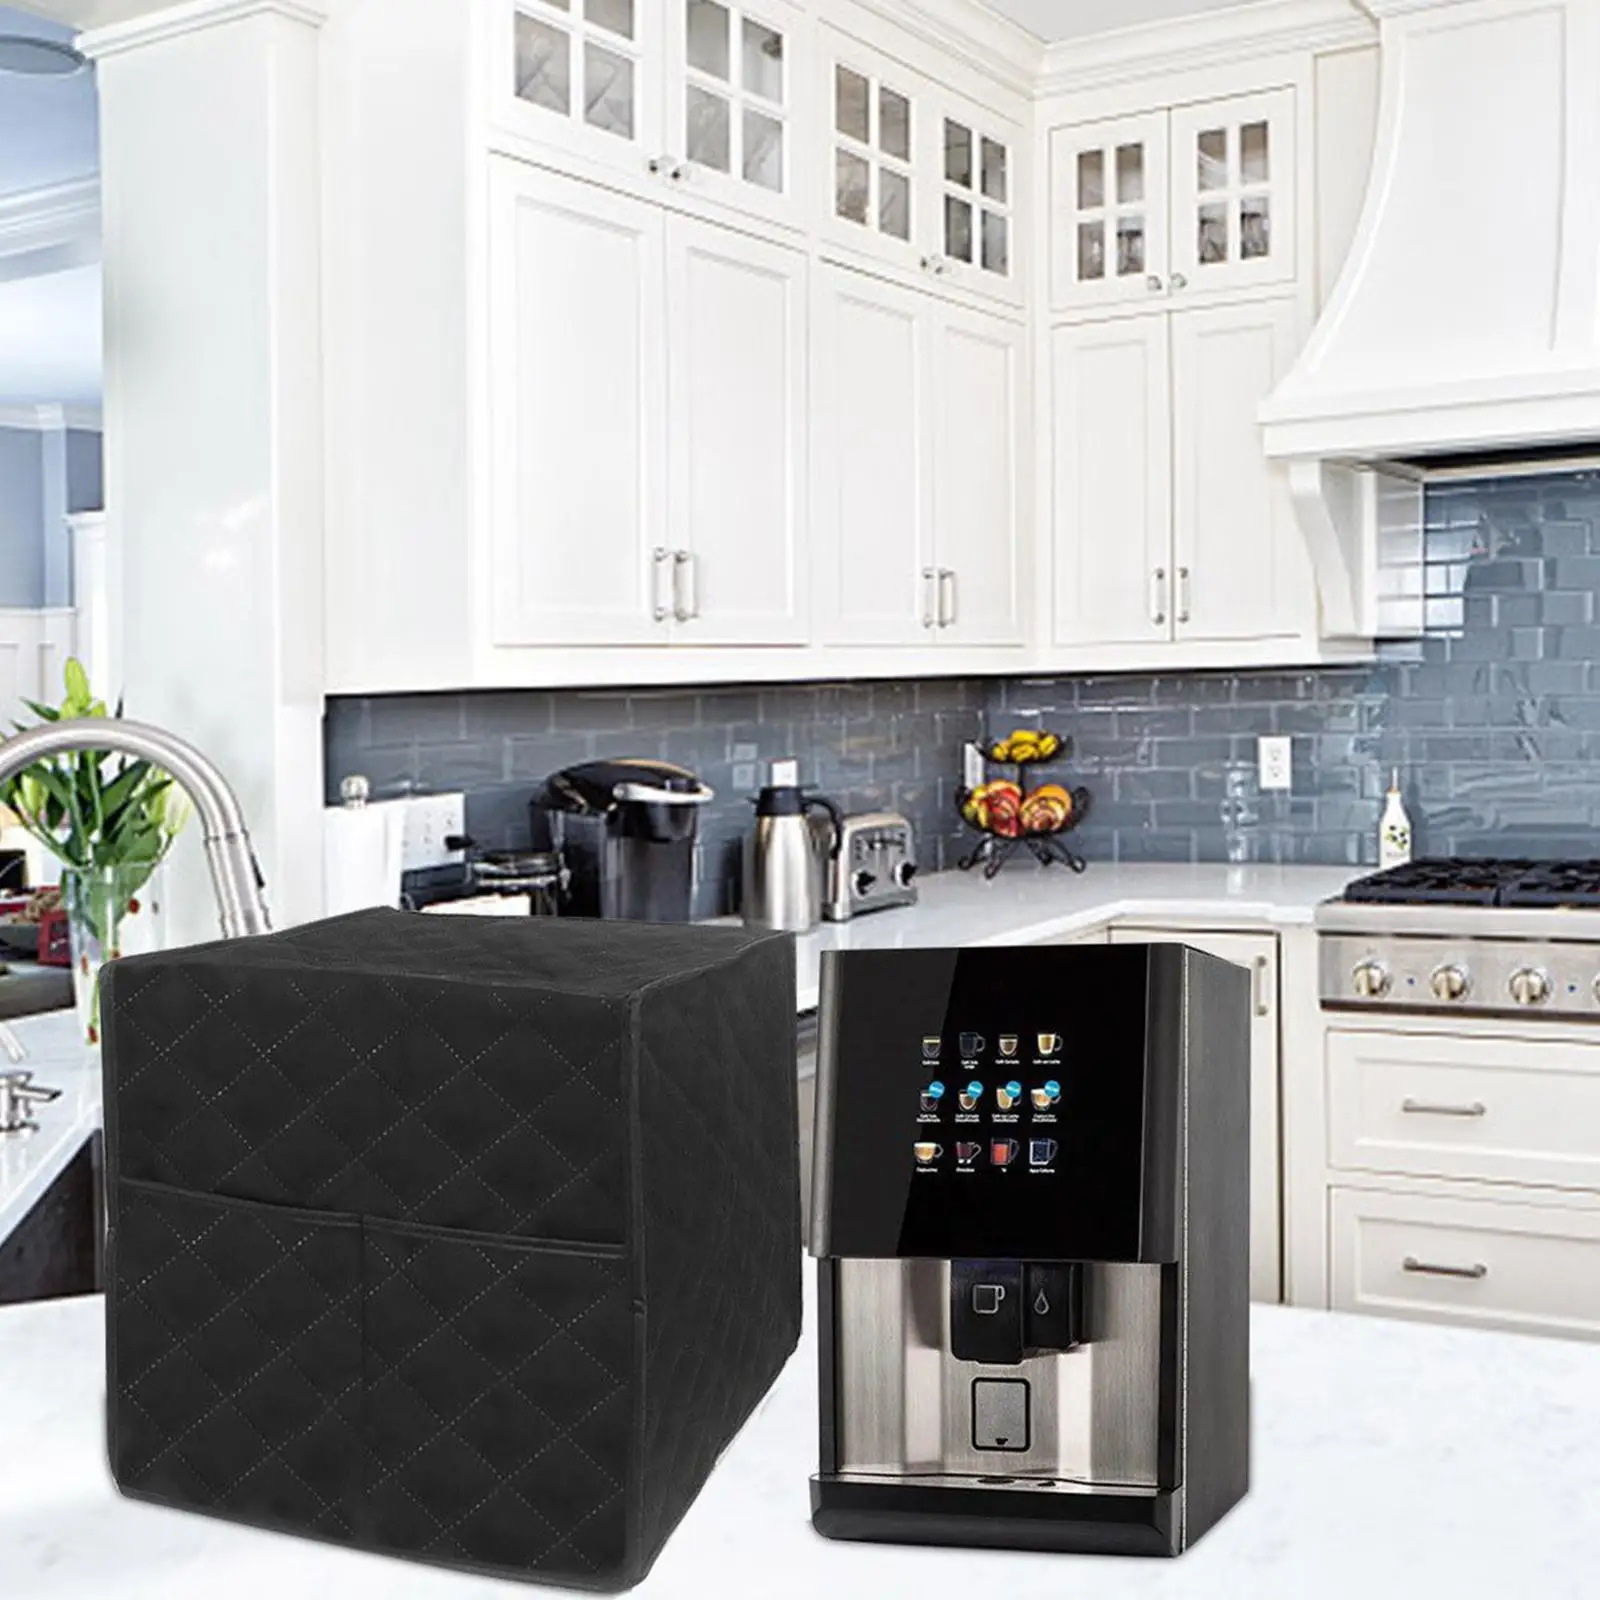 Coffee Maker Appliance Cover Dust with Storage Pocket ,13.4x13x14inch